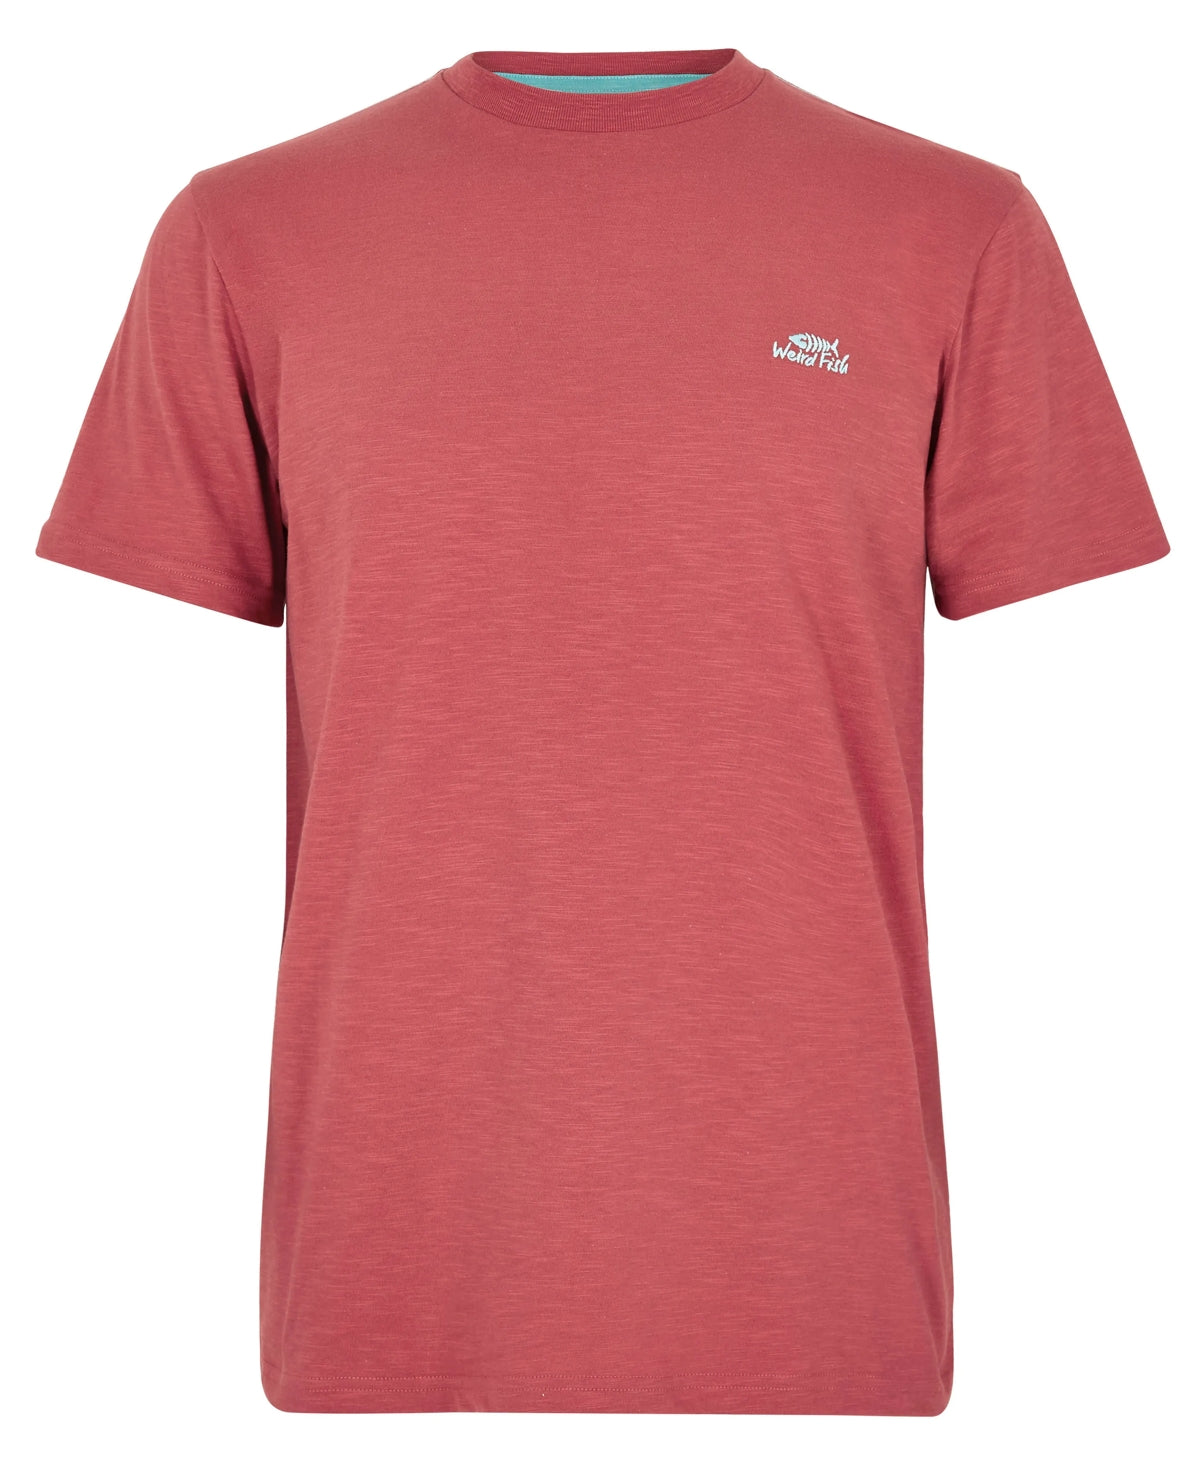 Weird Fish men's short sleeve Fished t-shirt in Rosewood with contrast logo.